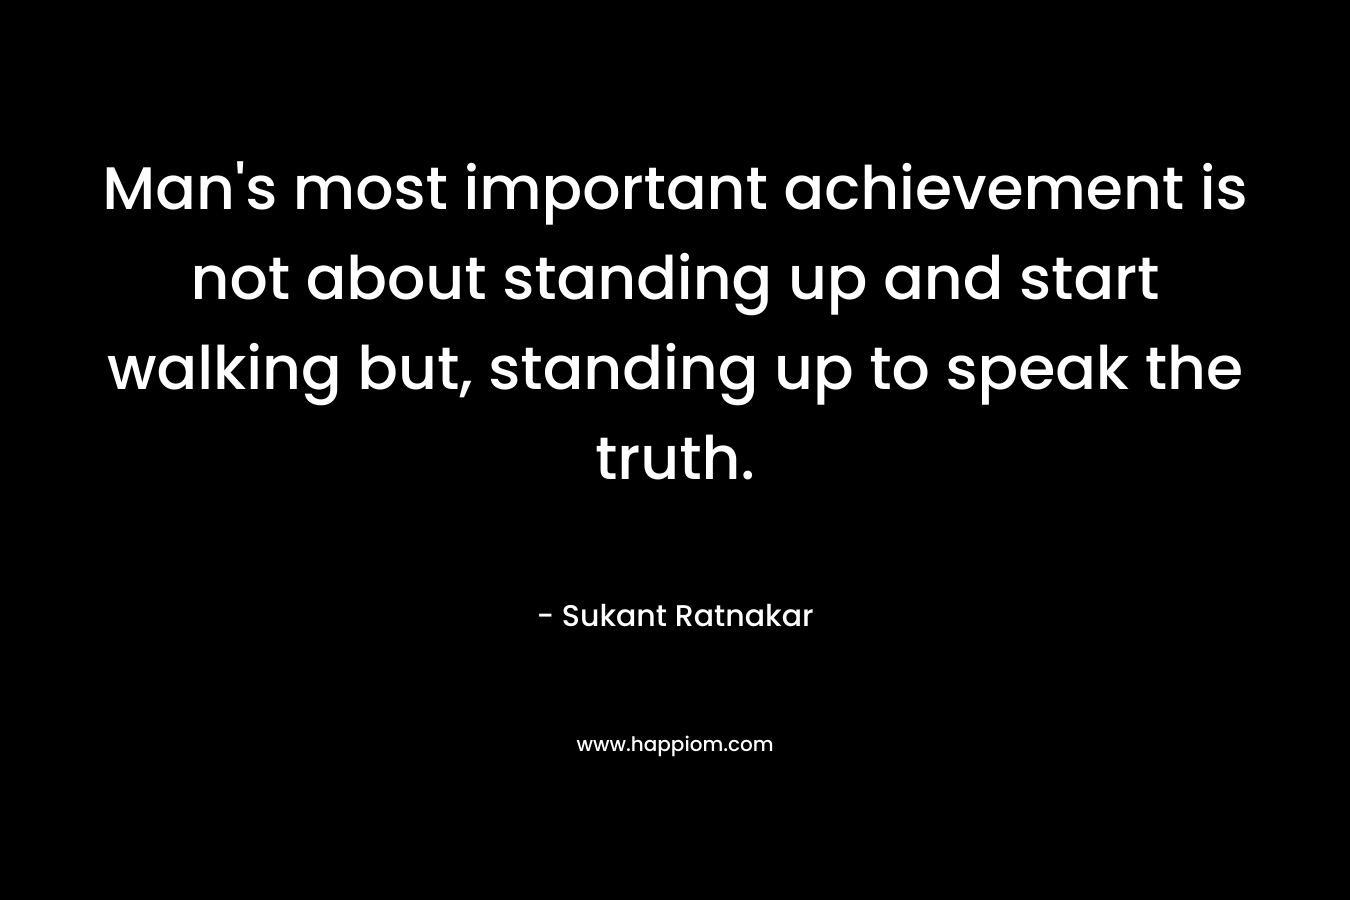 Man's most important achievement is not about standing up and start walking but, standing up to speak the truth.